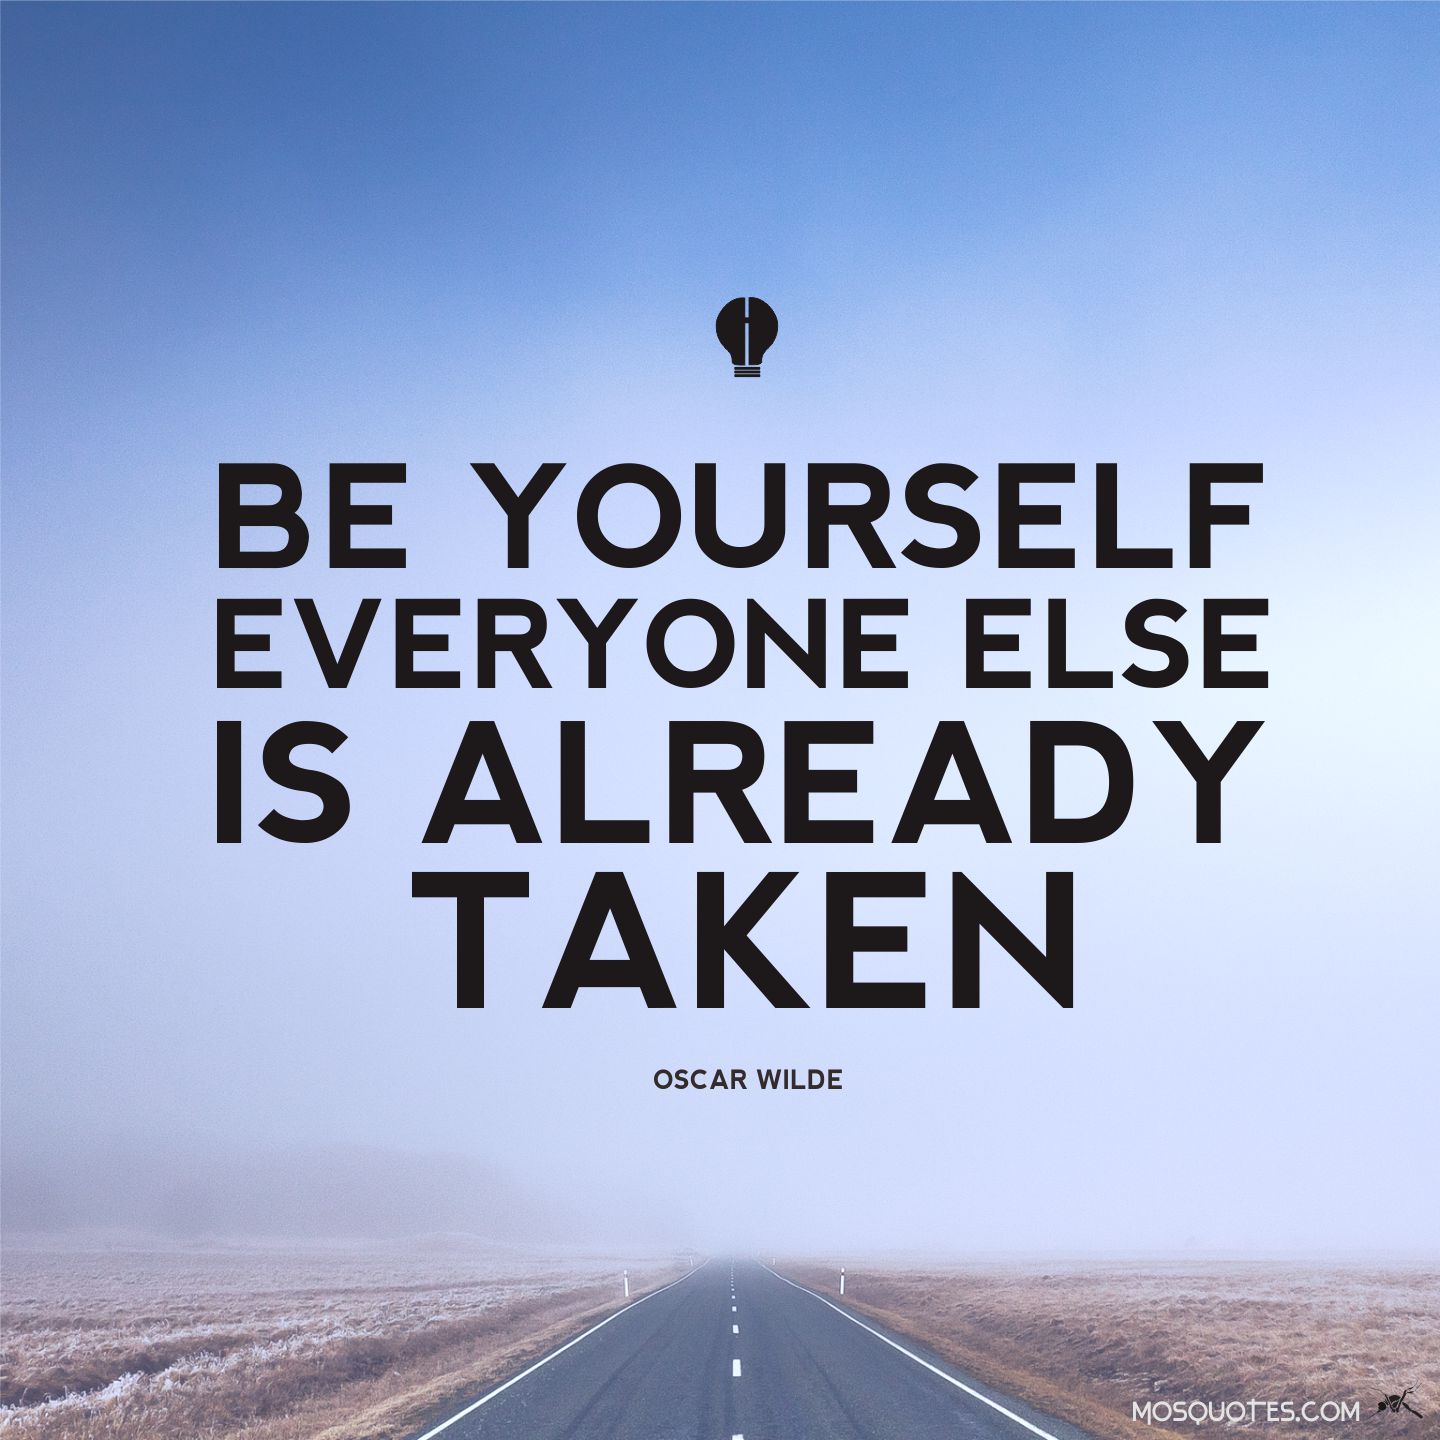 Everybody was to the world. Be yourself; everyone else is already taken." - Oscar Wilde. Be yourself everyone else is already taken. Be yourself. Be yourself цитата.